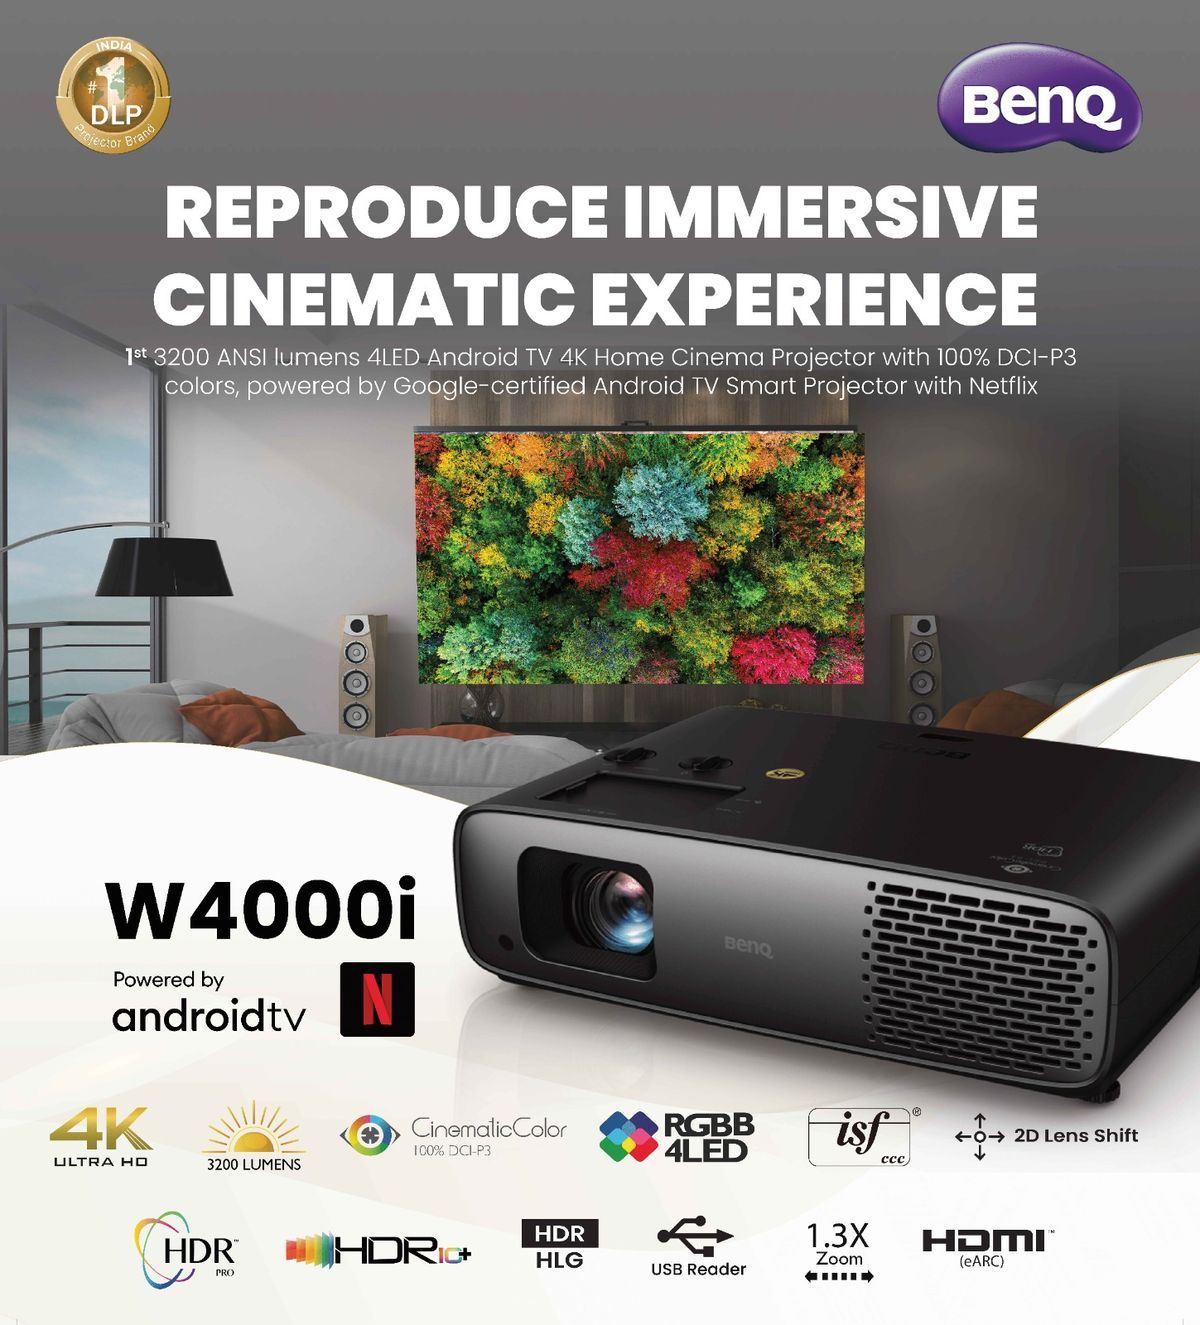 BenQ Launches state of the art 4LED 4K Smart Projector W4000i To Deliver Immersive, Theatre-Like Movie Experience at Home